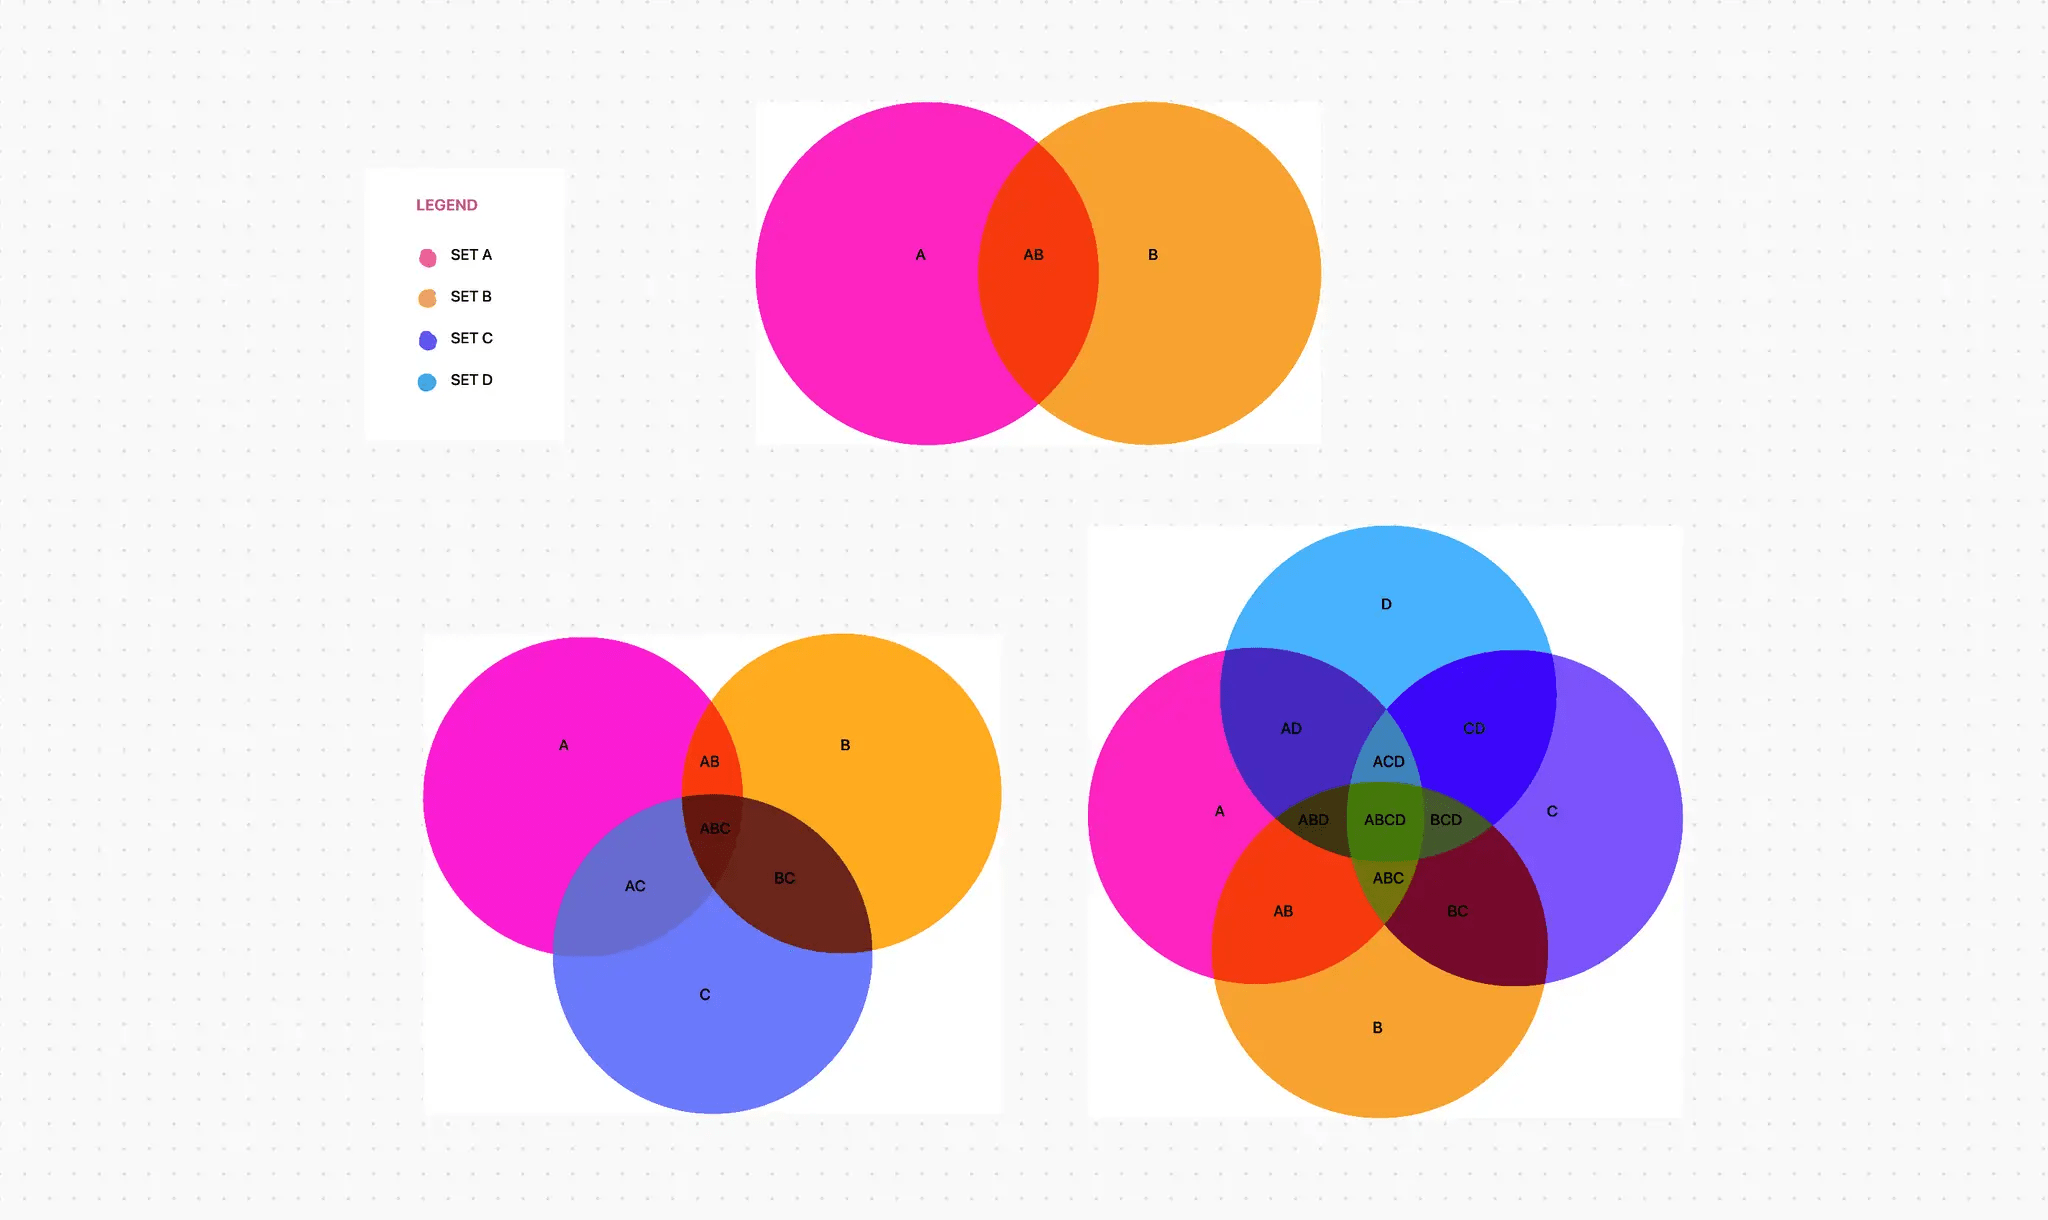 Use ClickUp's ready-to-use and completely customizable template to create Venn Diagrams